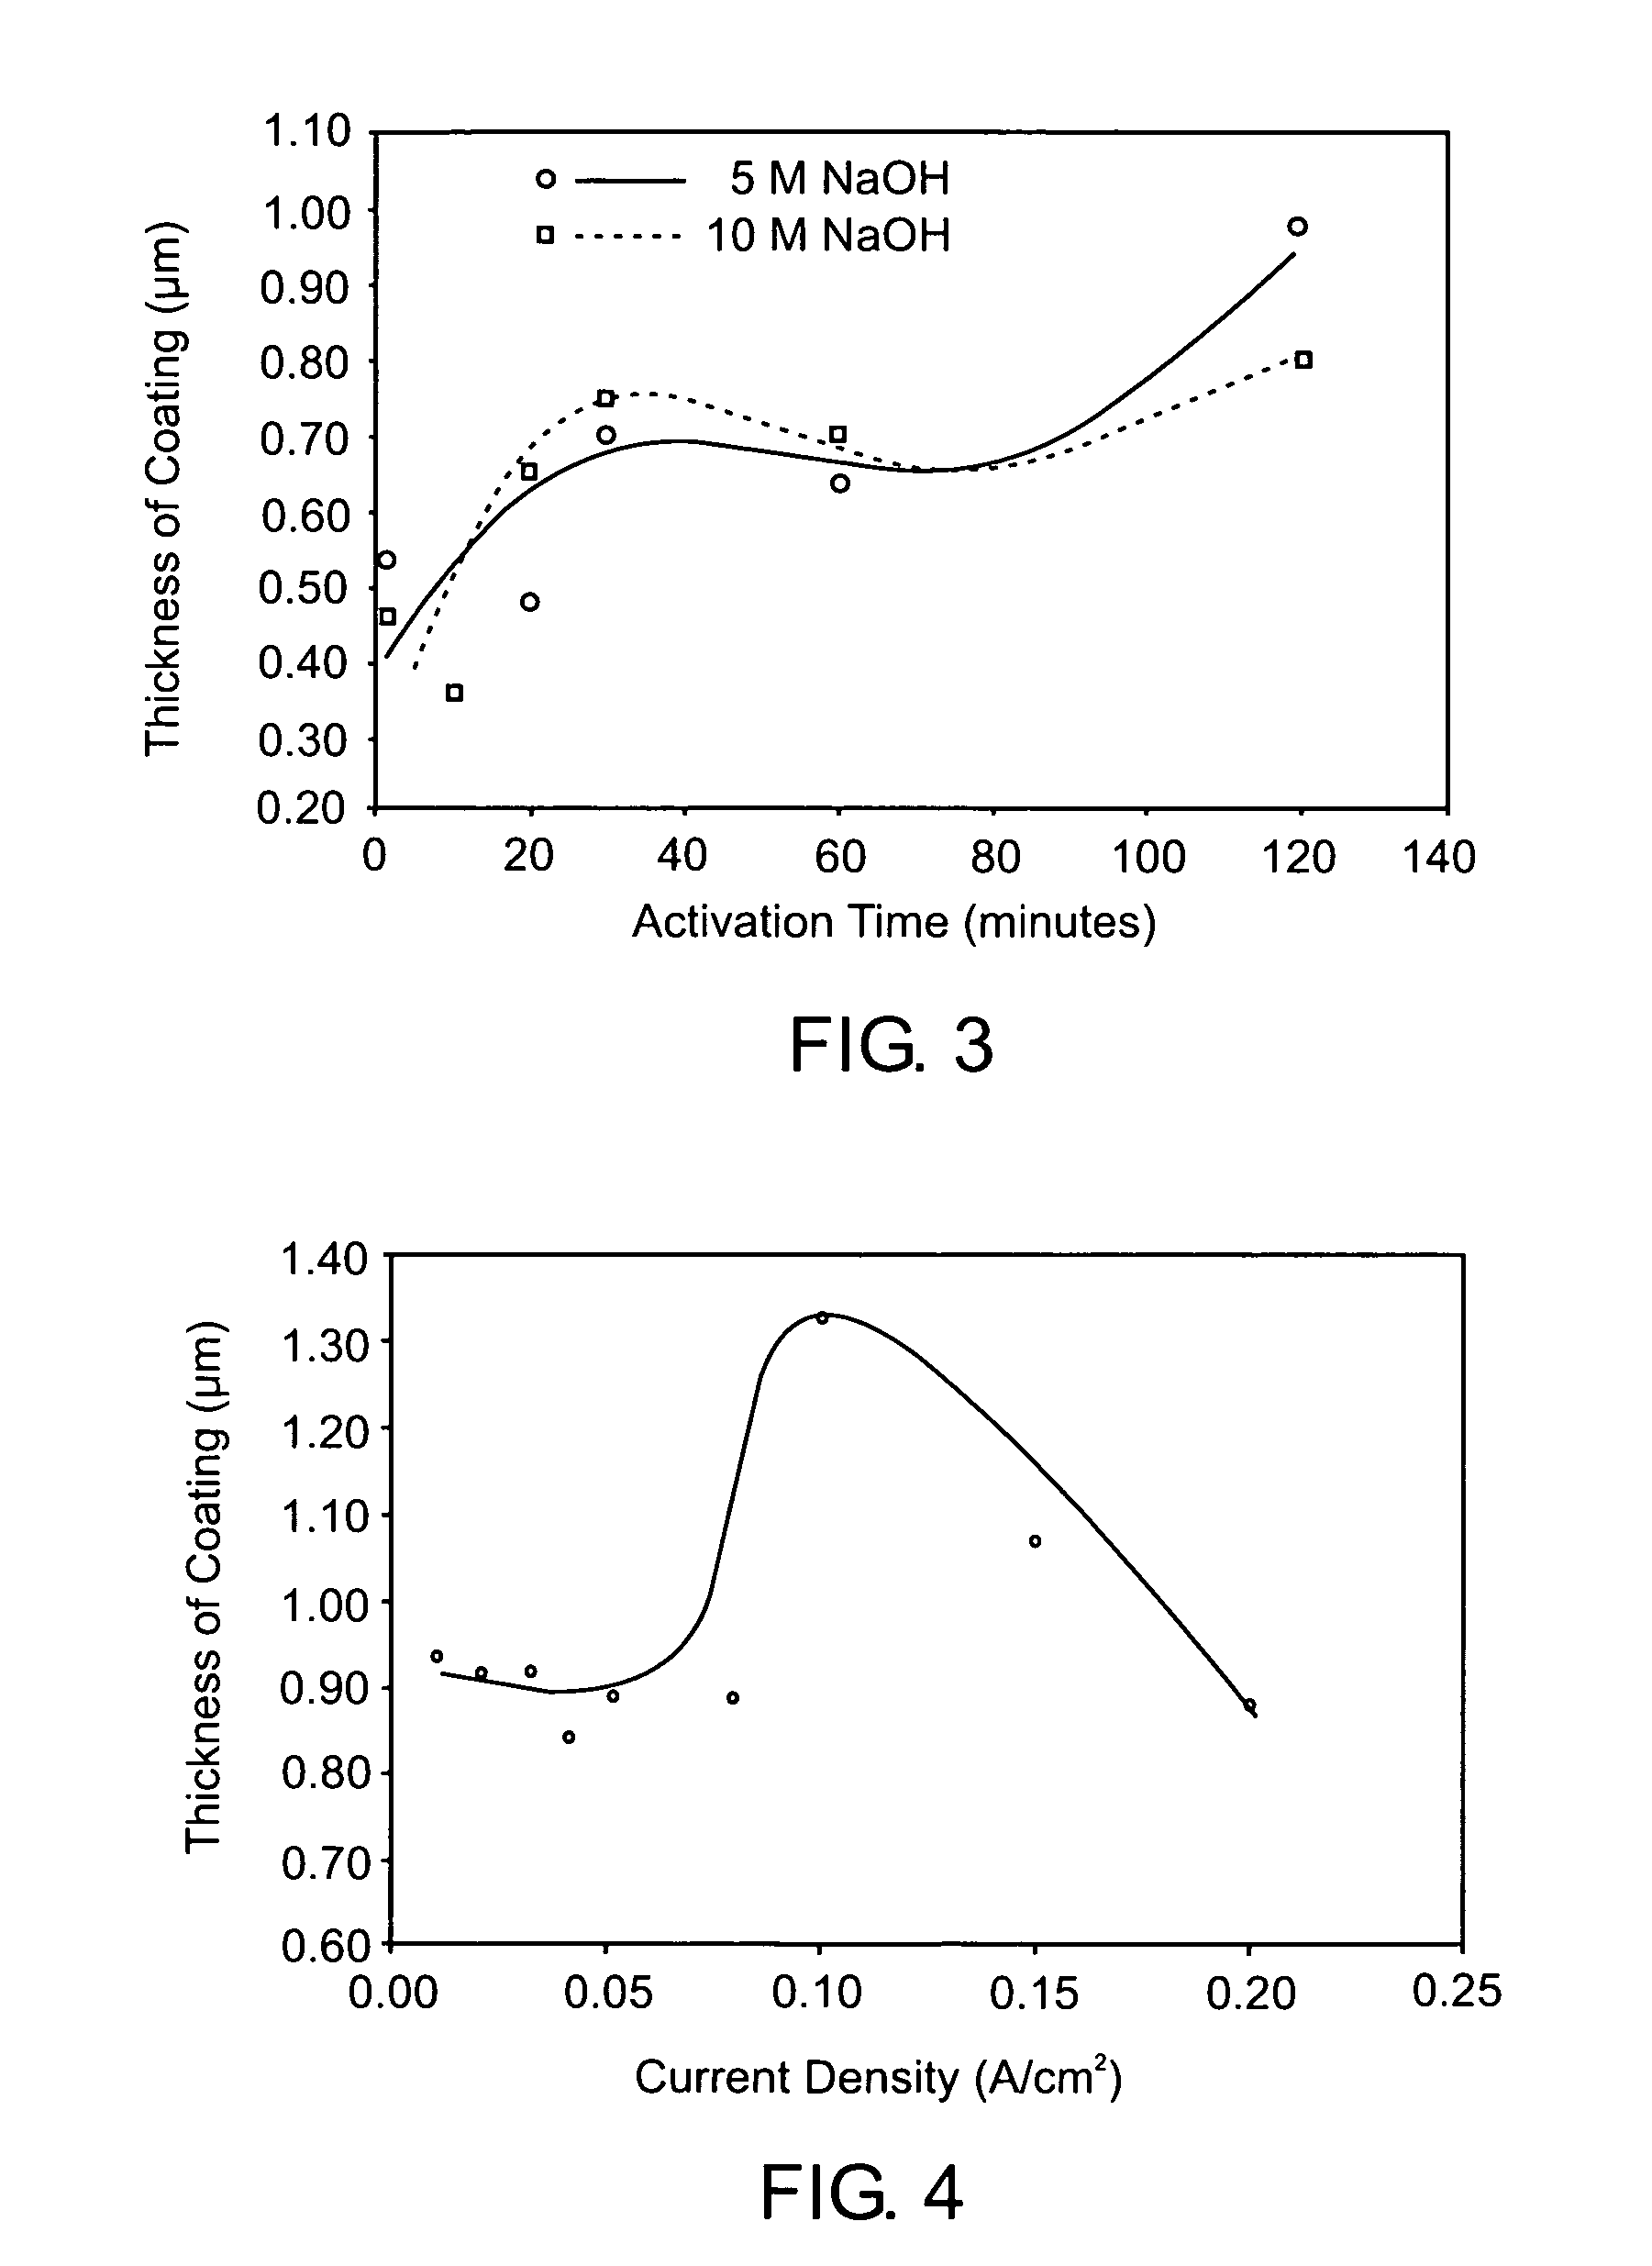 Bioceramic coating of a metal-containing substrate